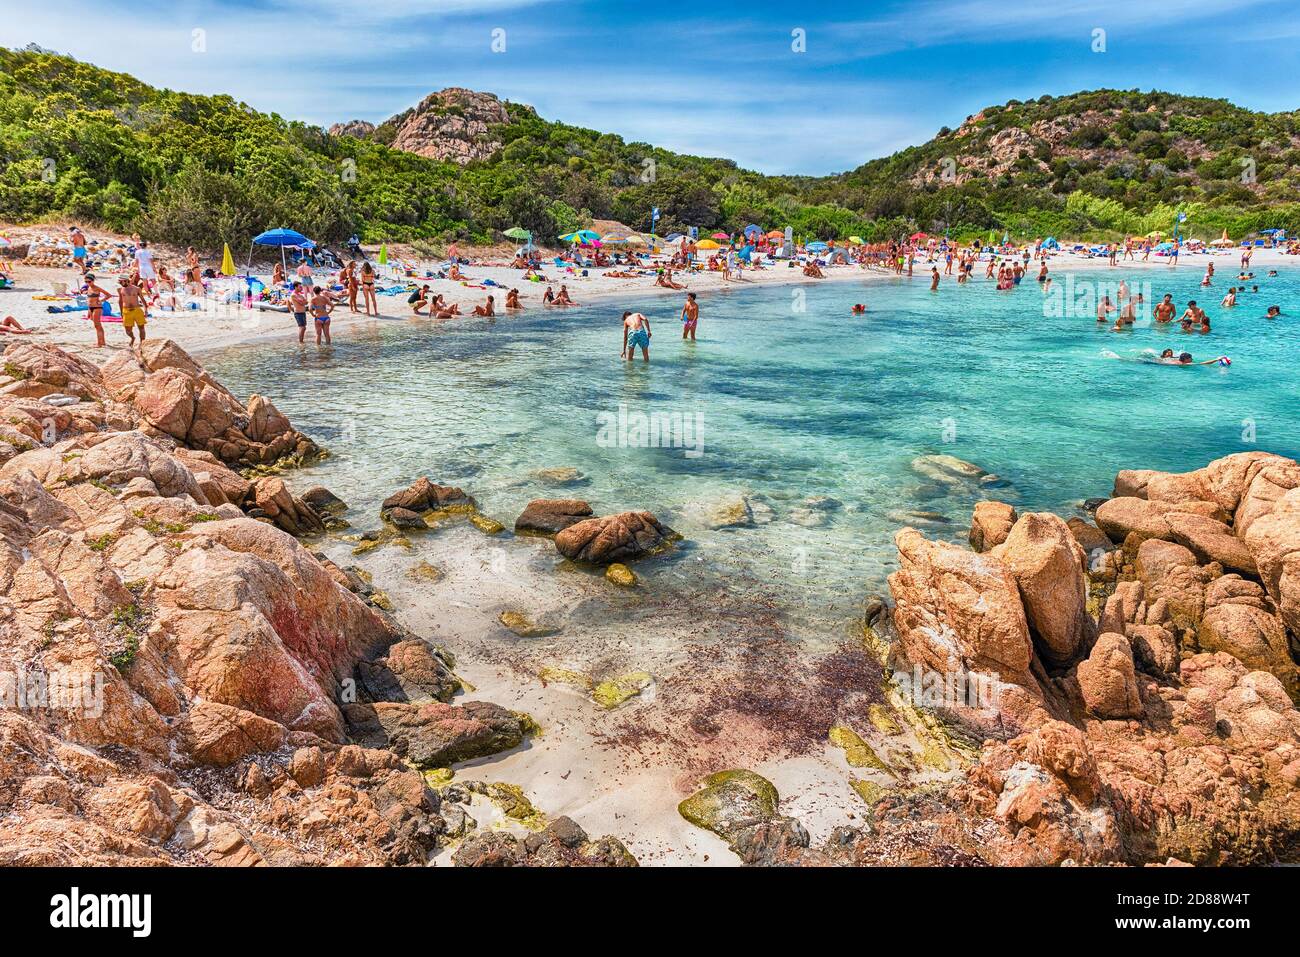 SARDINIA, ITALY - AUGUST 3: View of the iconic Spiaggia del Principe, one of the most beautiful beaches in Costa Smeralda, Sardinia, Italy, as seen on Stock Photo